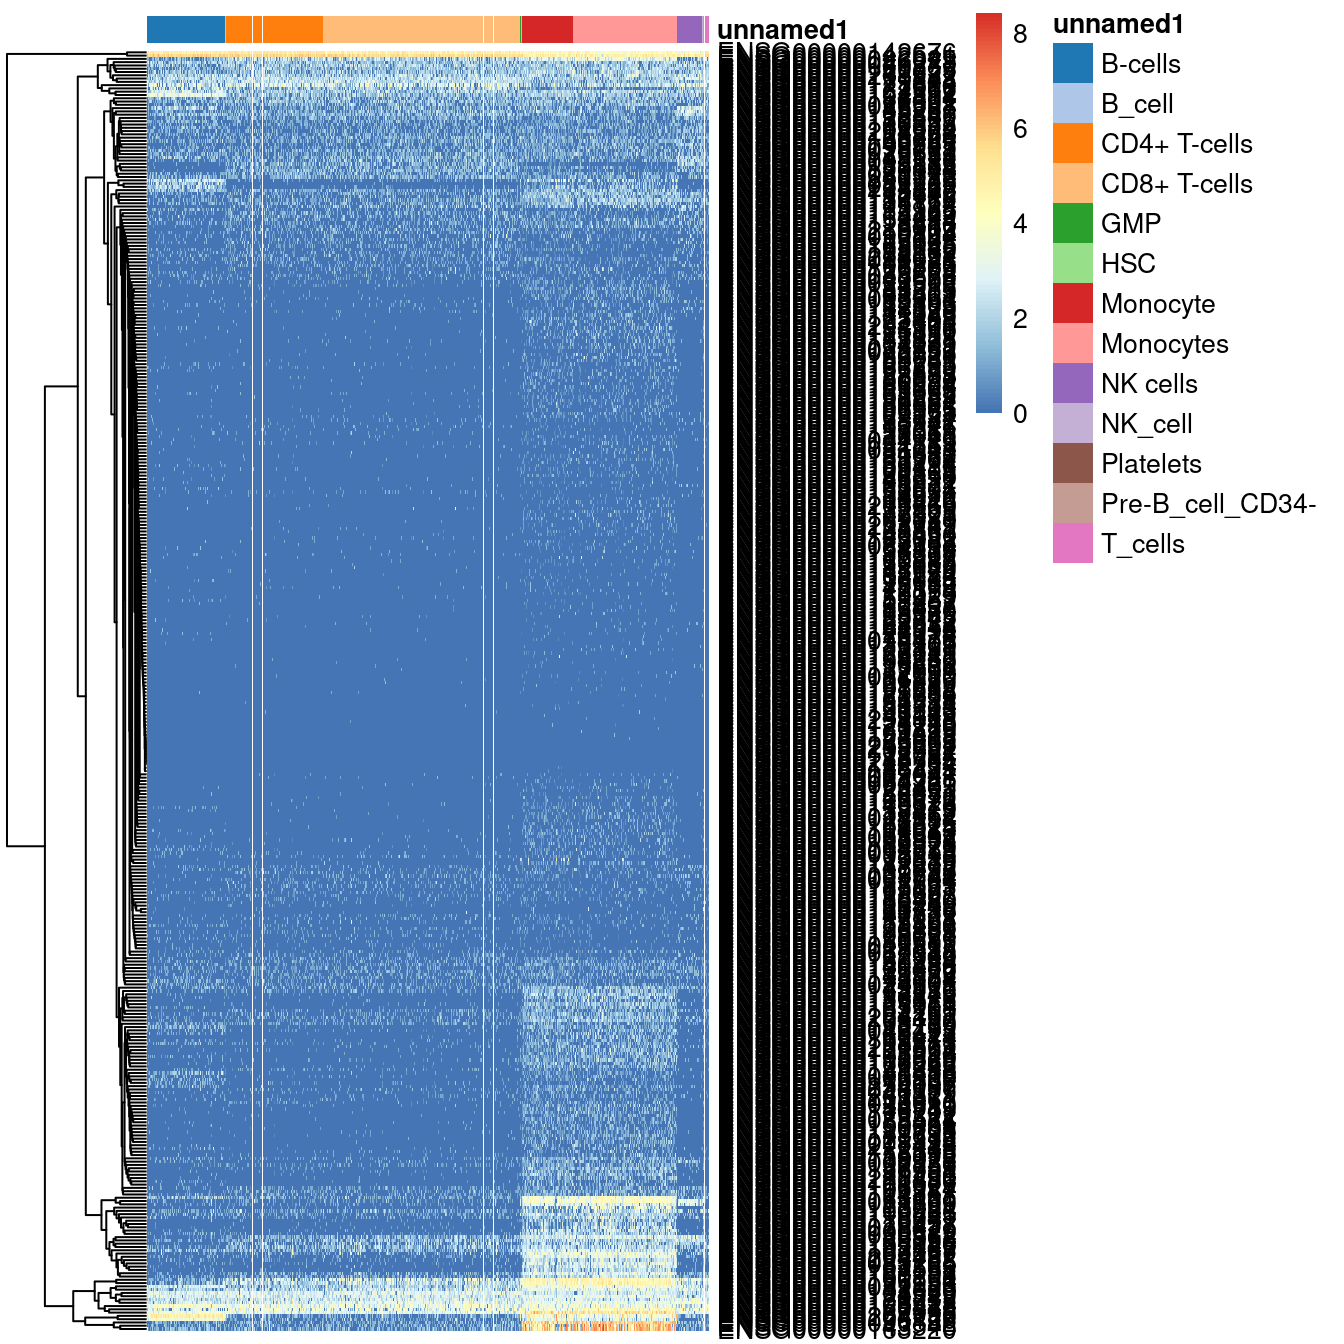 Heatmap of log-expression values in the PBMC dataset for all marker genes upregulated in monocytes in the Blueprint/ENCODE and Human Primary Cell Atlas reference datasets. Combined labels for each cell are shown at the top.